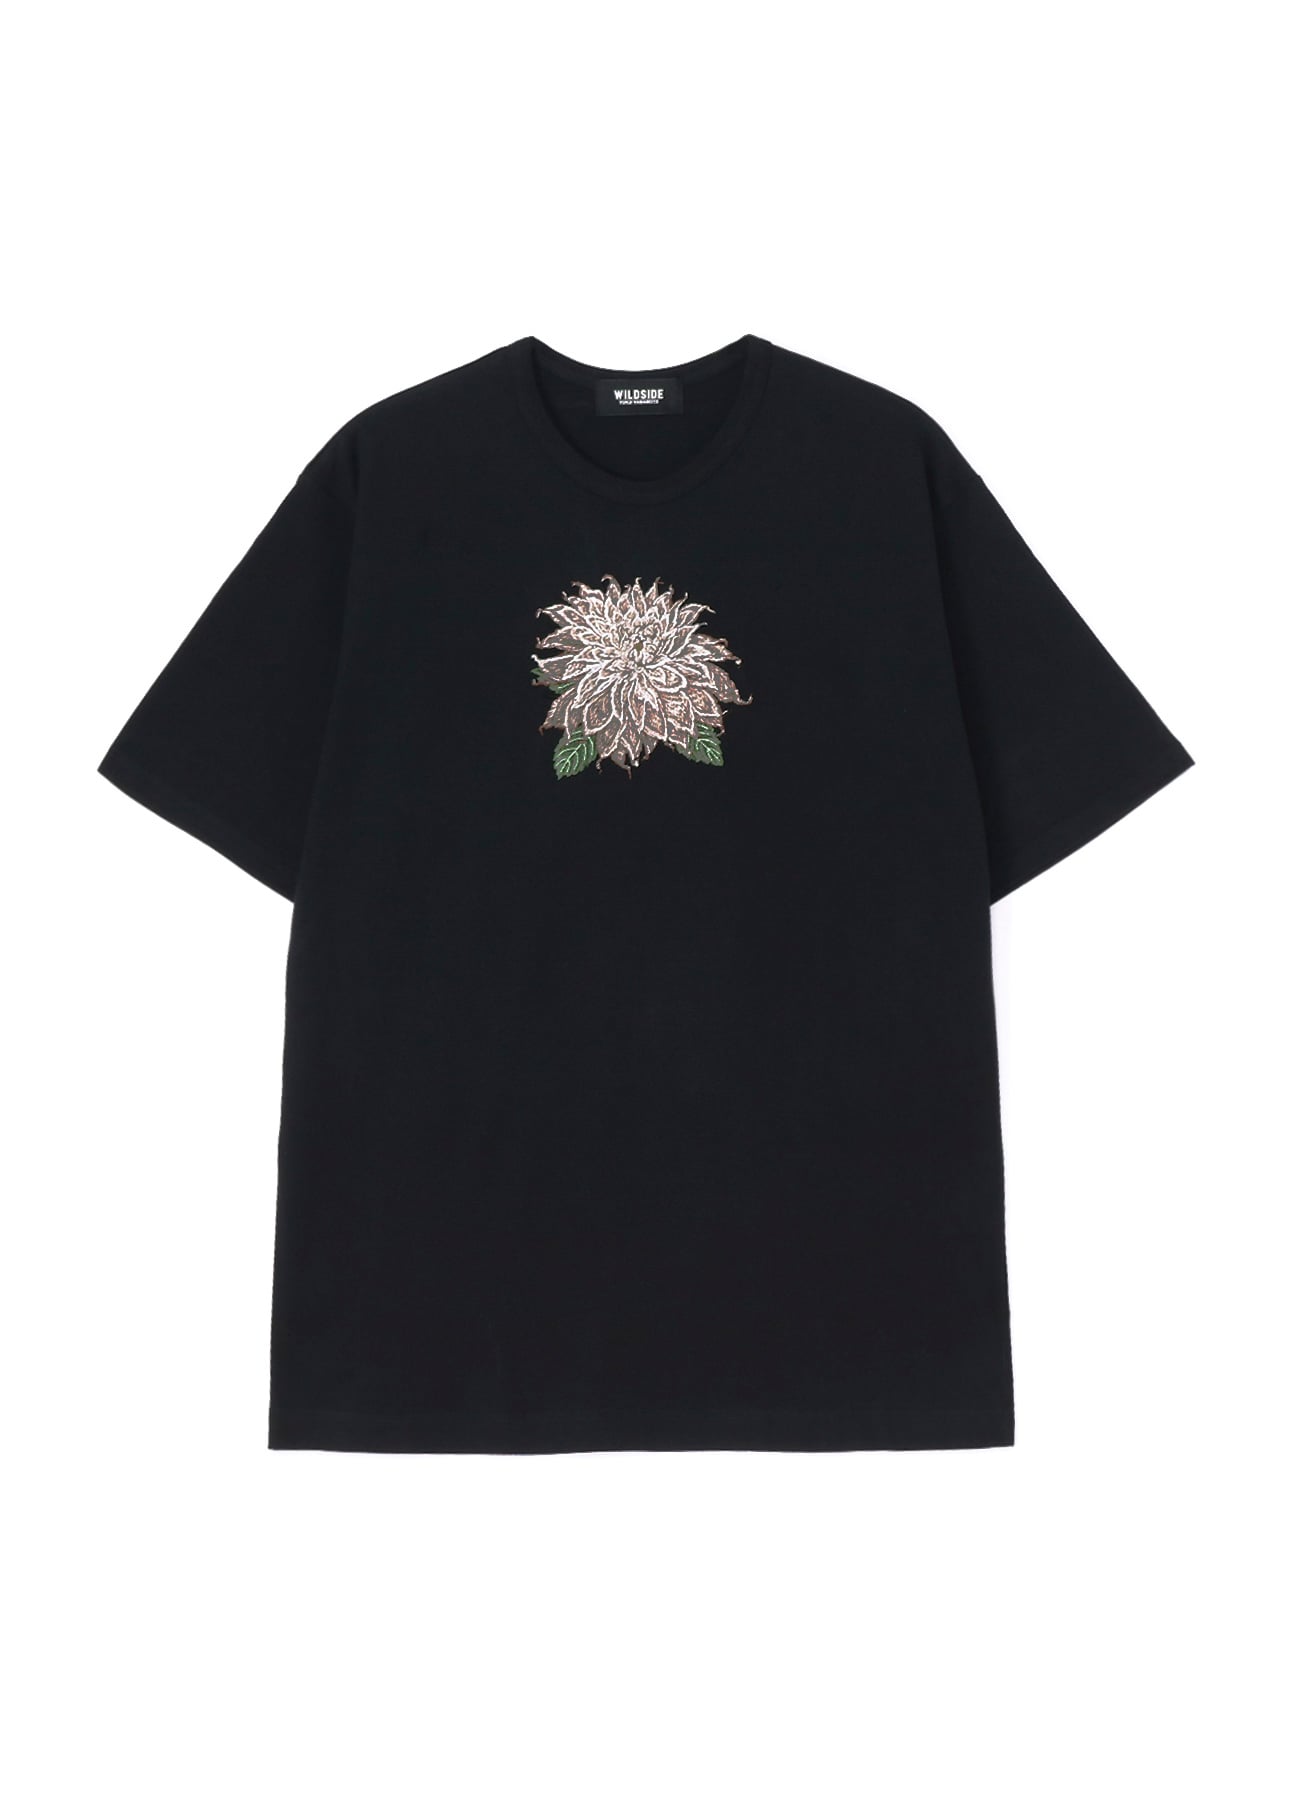 【5/8 12:00 Release】Embroidery Dahlia SS T-shirt